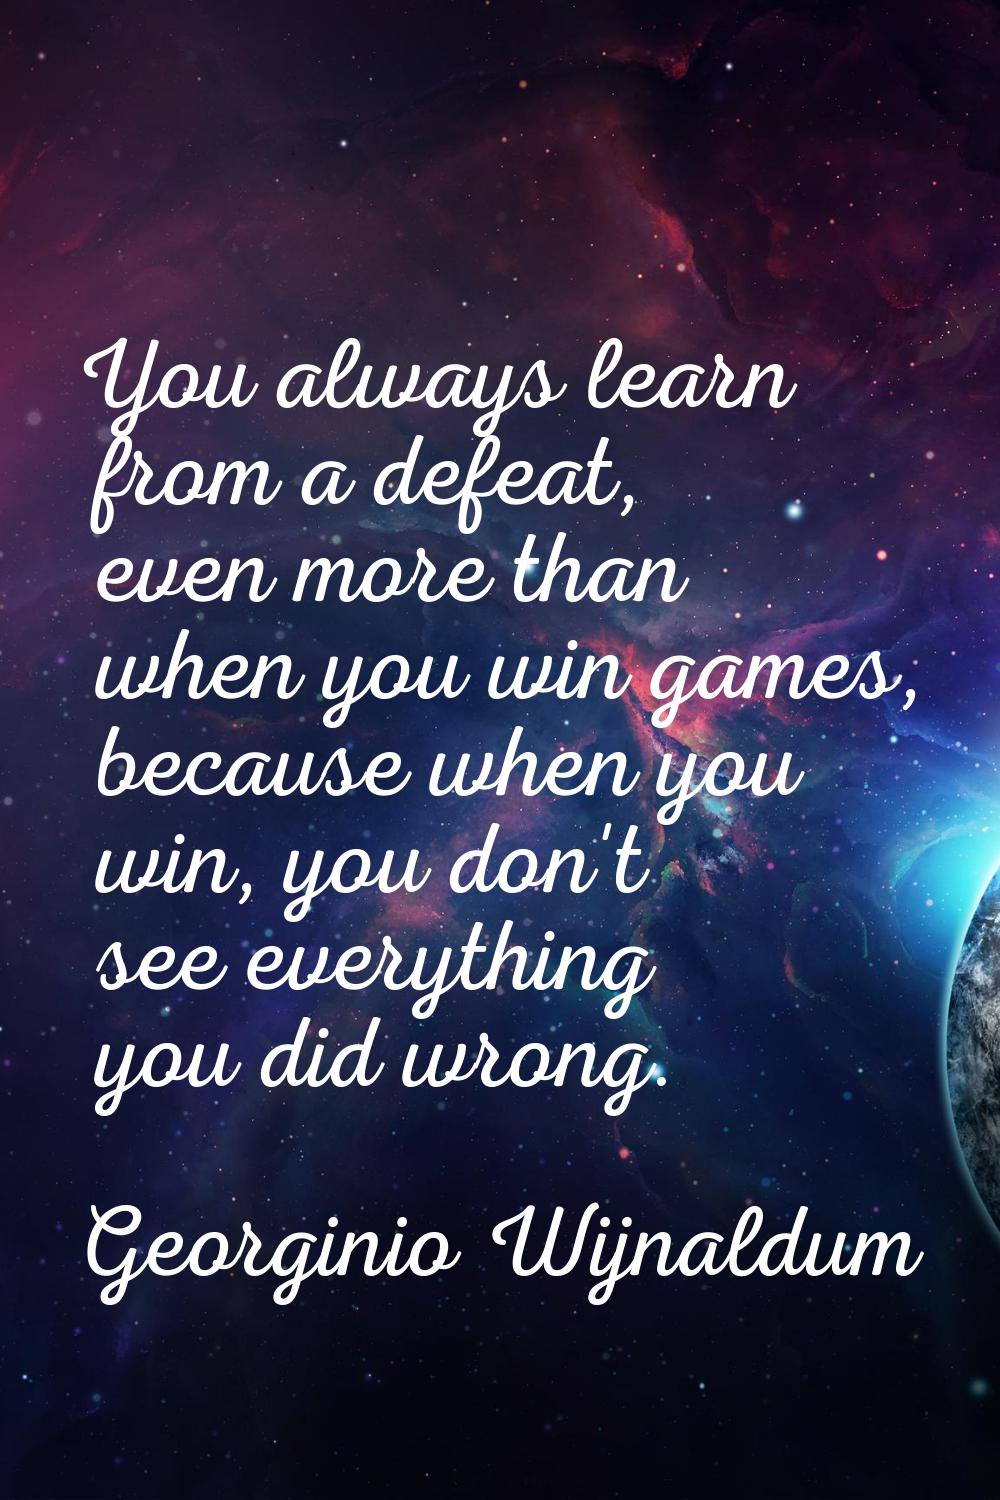 You always learn from a defeat, even more than when you win games, because when you win, you don't 